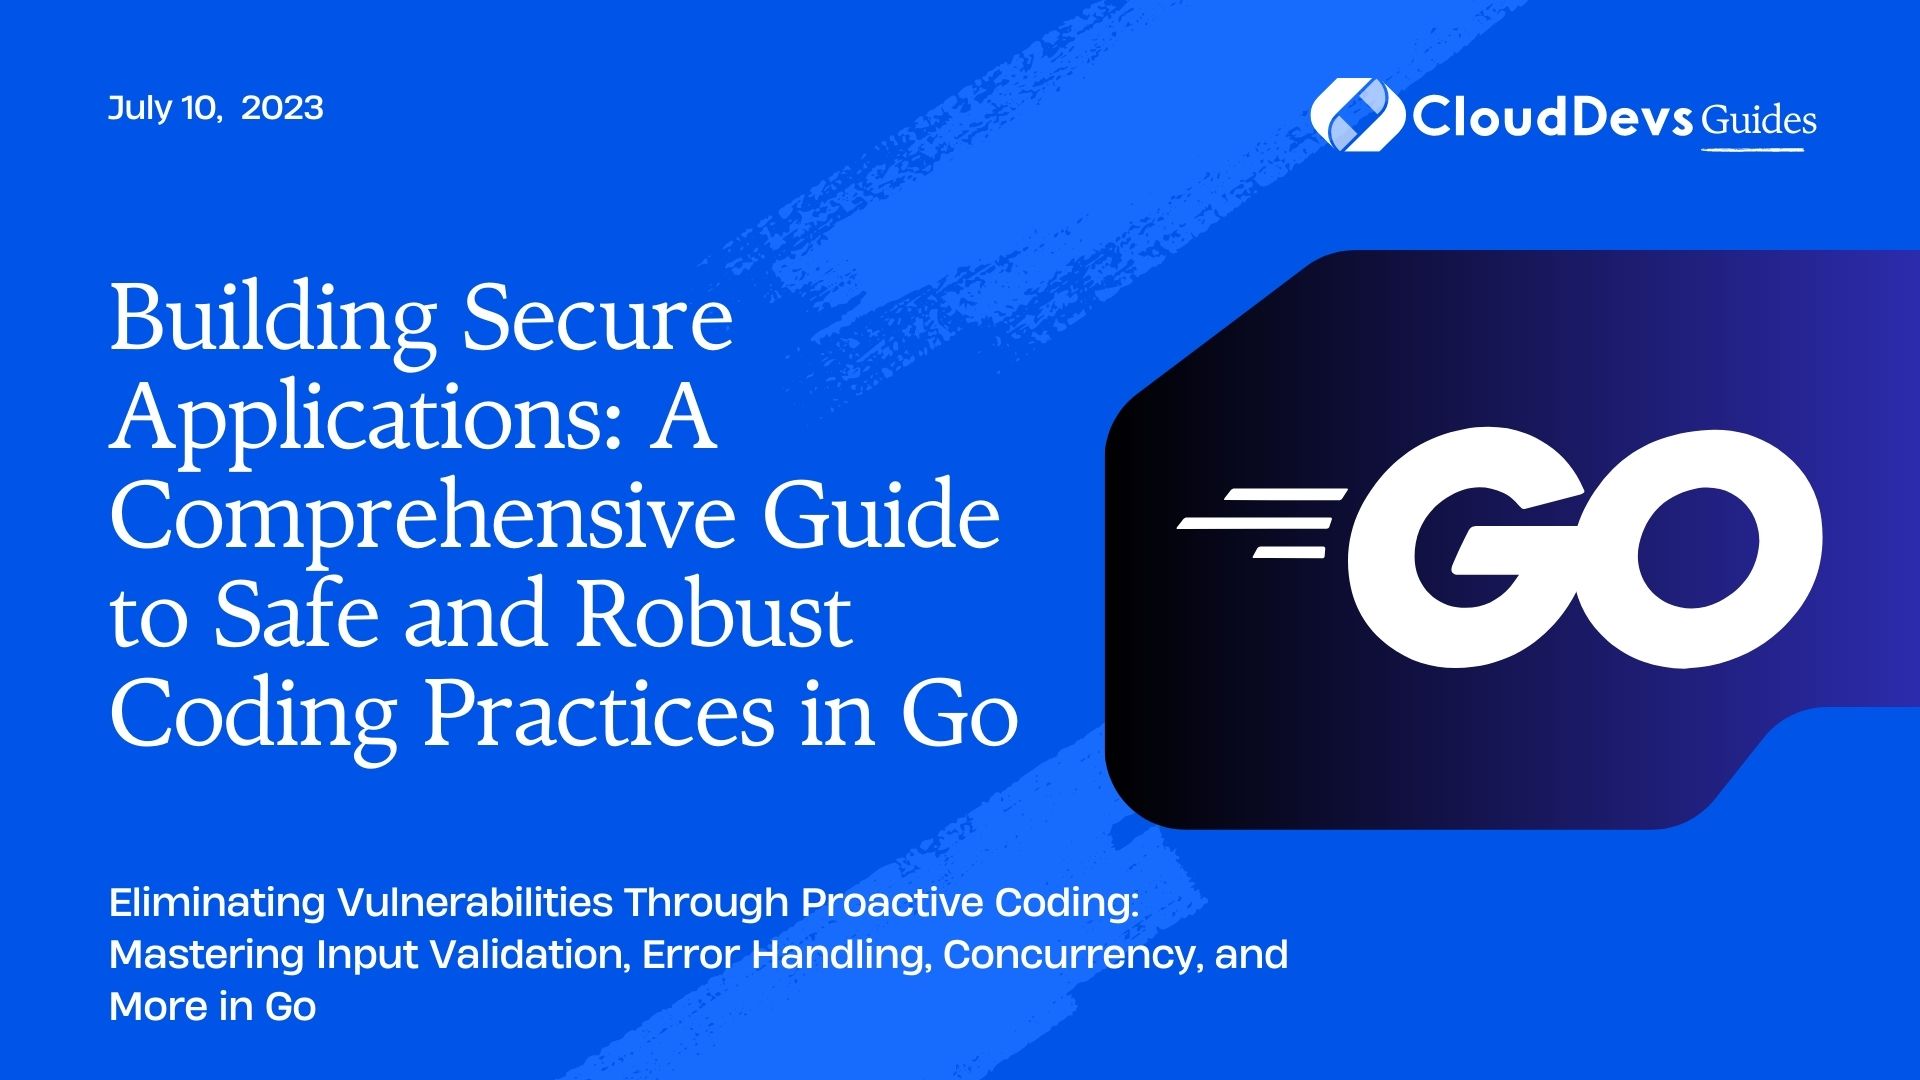 Building Secure Applications: A Comprehensive Guide to Safe and Robust Coding Practices in Go